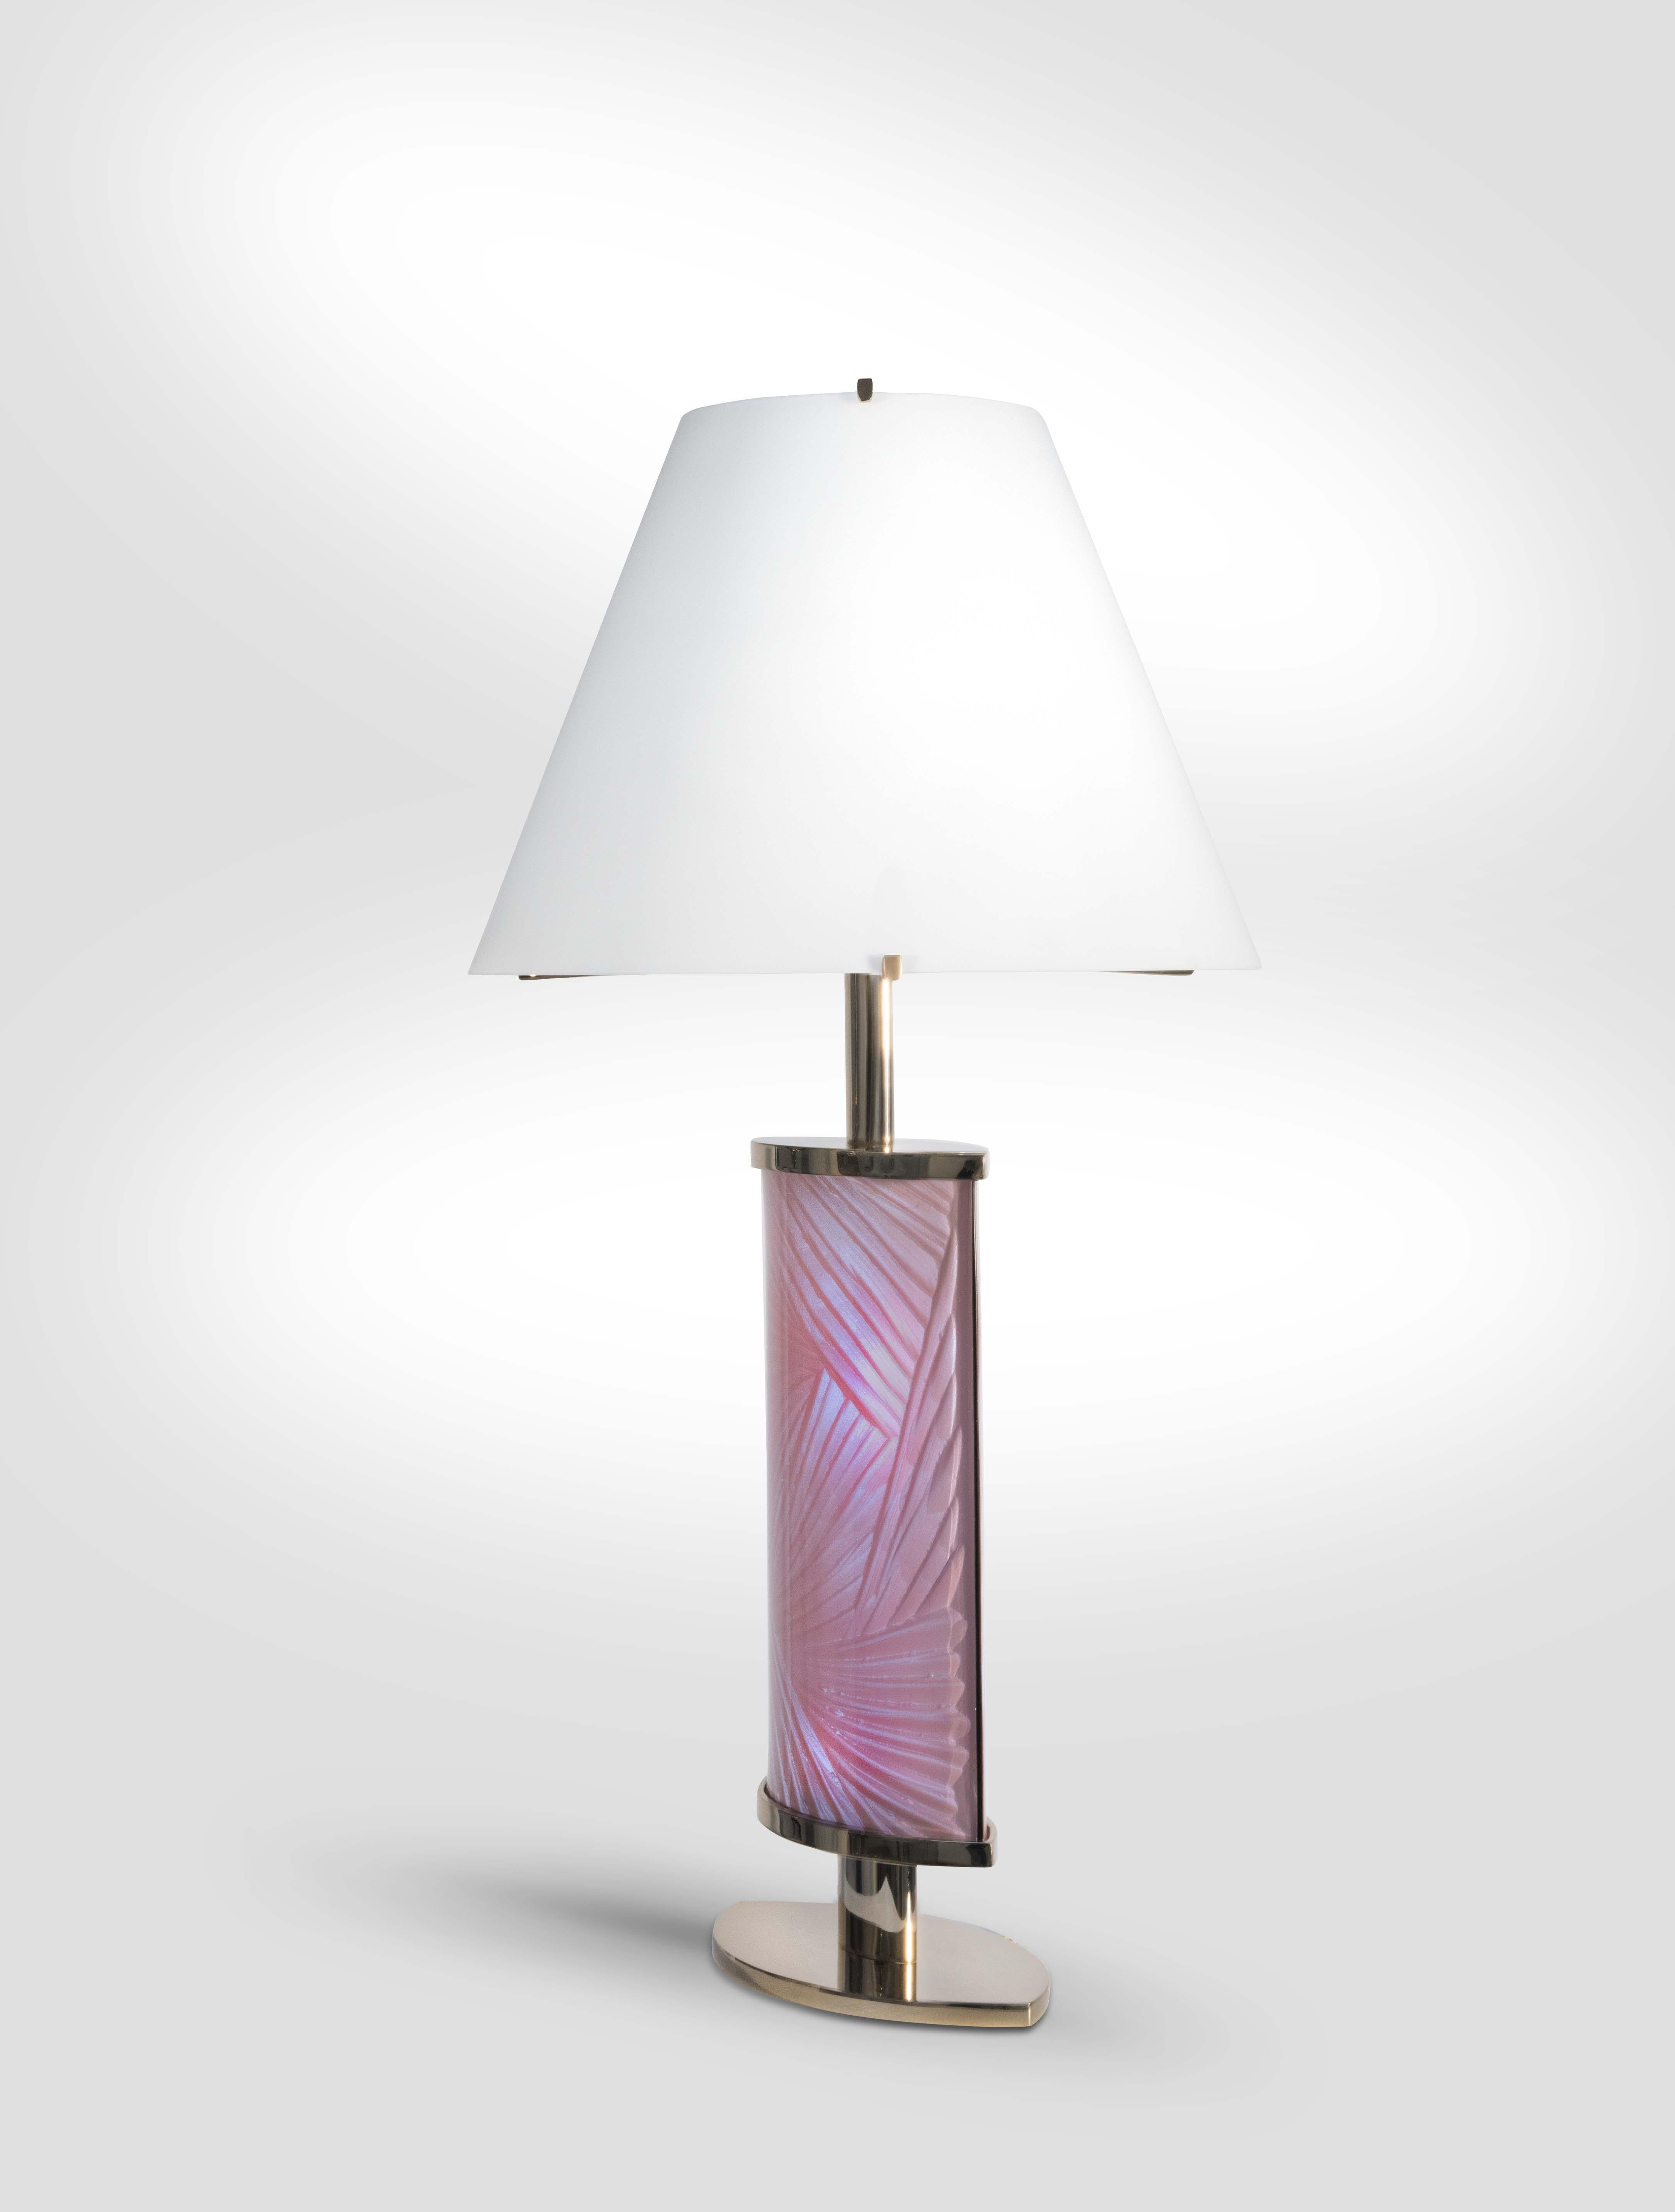 
The 'Tigra' lamp is not just a table lamp. It’s an object of pure art and design. Sober, fine and elegant even when off, it is ideal for adding a touch of color to the bedroom or any other environment.
The structure is entirely made with 24 kt